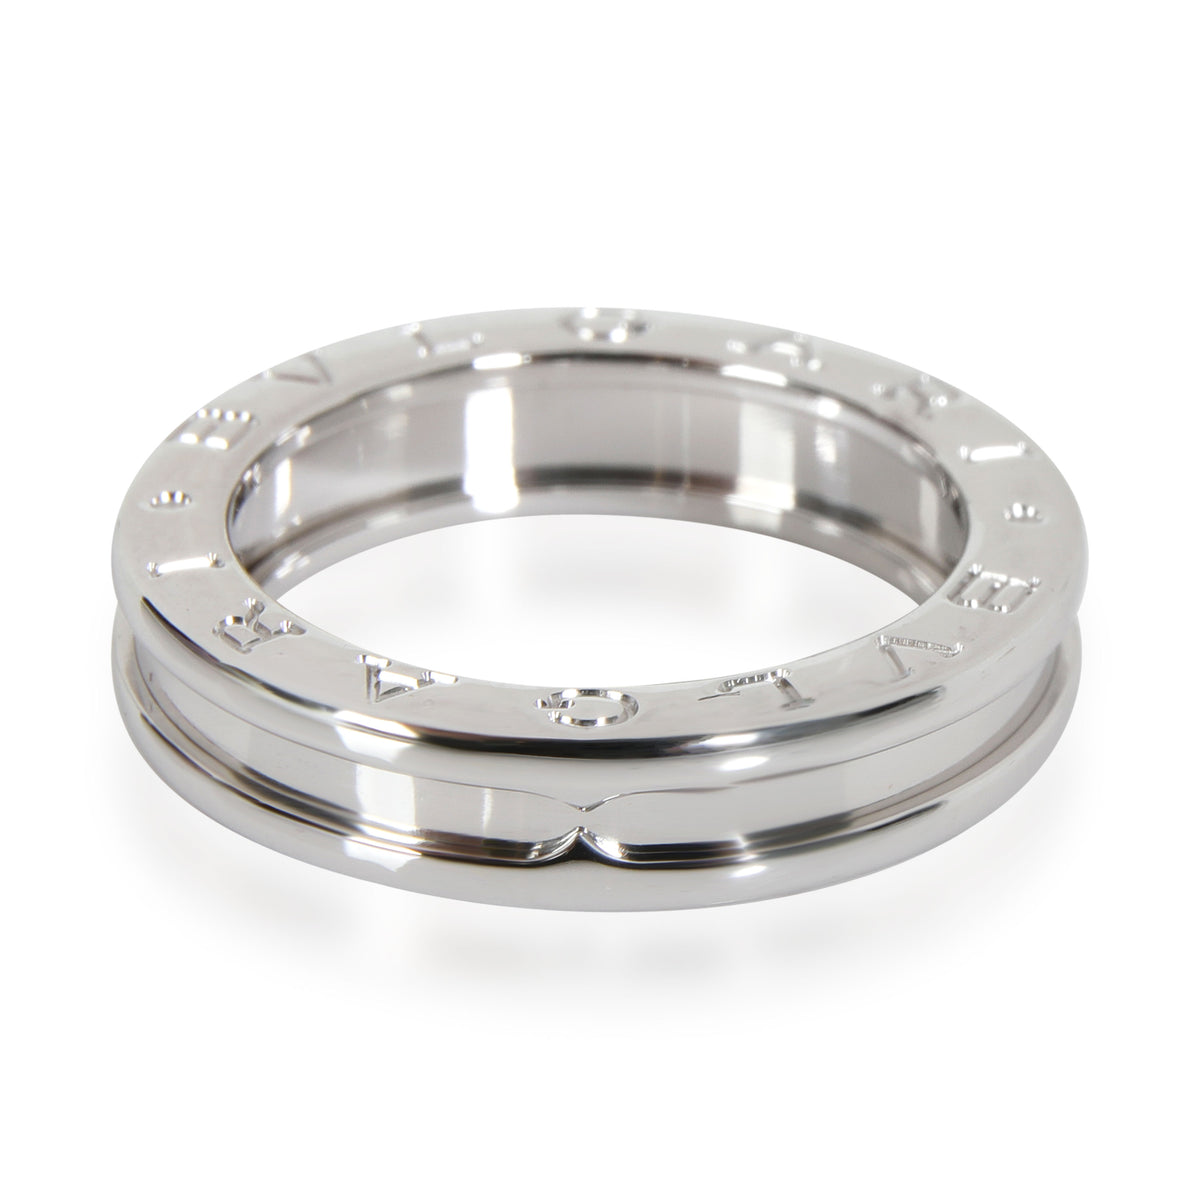 Bvlgari B.Zero1 One-Band Ring in 18K White Gold - Fashion Ring / White Gold | Pre-owned & Certified | used Second Hand | Unisex